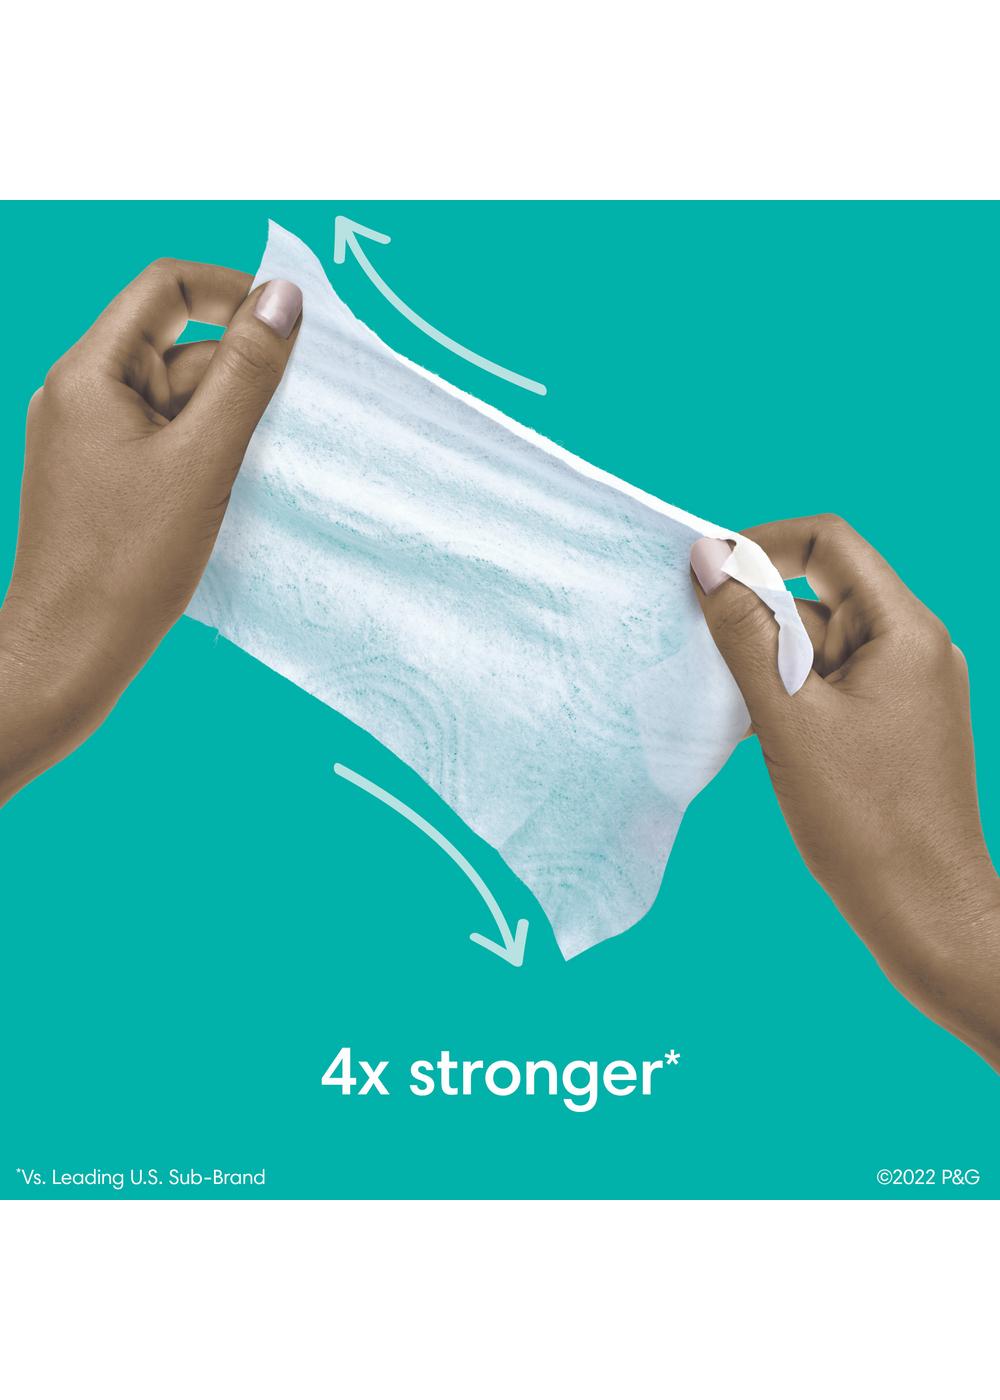 Pampers Baby Wipes - Fragrance Free; image 8 of 10